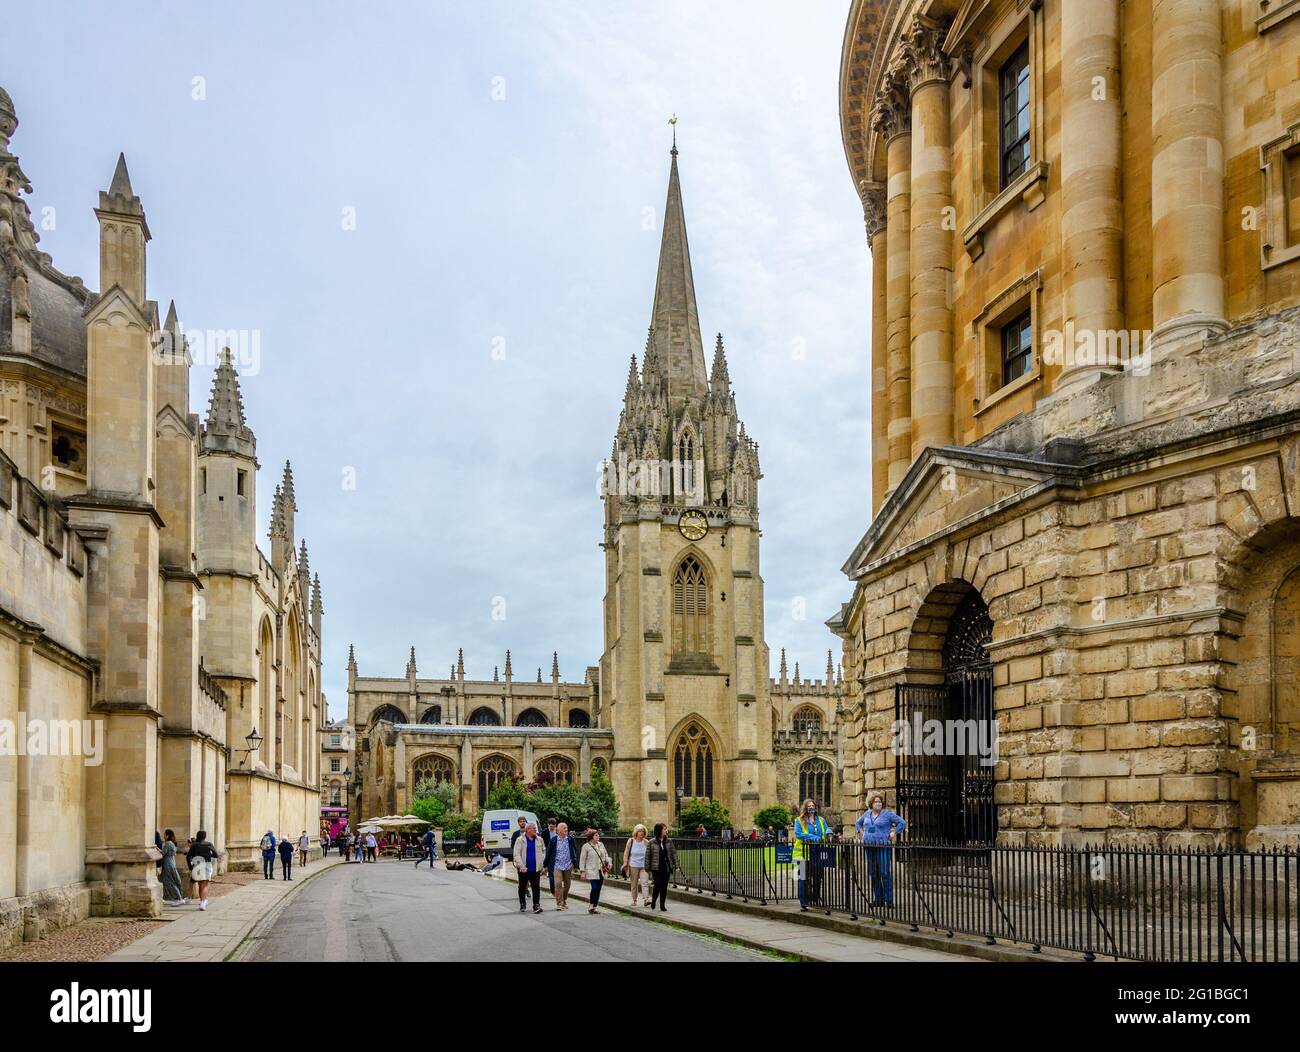 A view along Catte Street in Oxford with The Radcliffe Camer on the right and University Church of St Mary the Virgin on front. Stock Photo